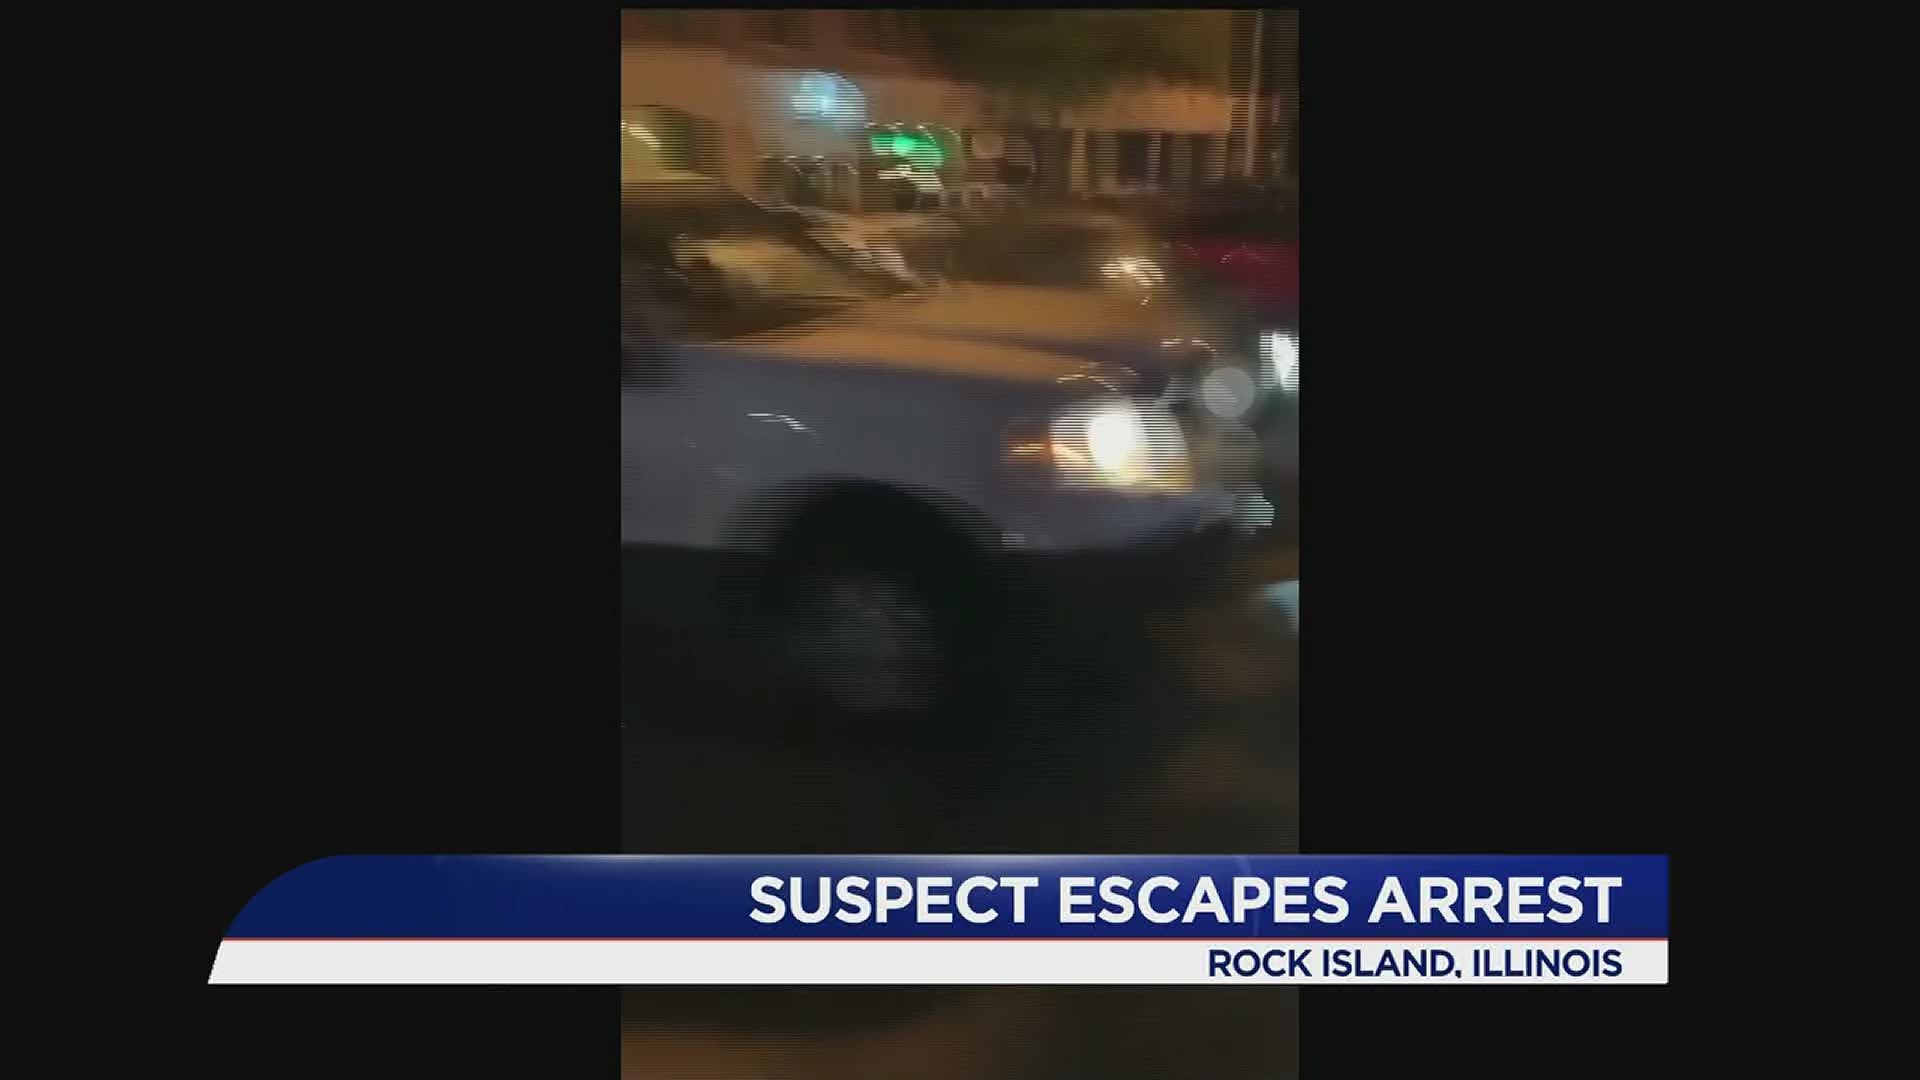 Cellphone video captures chaotic scene in The District of Rock Island